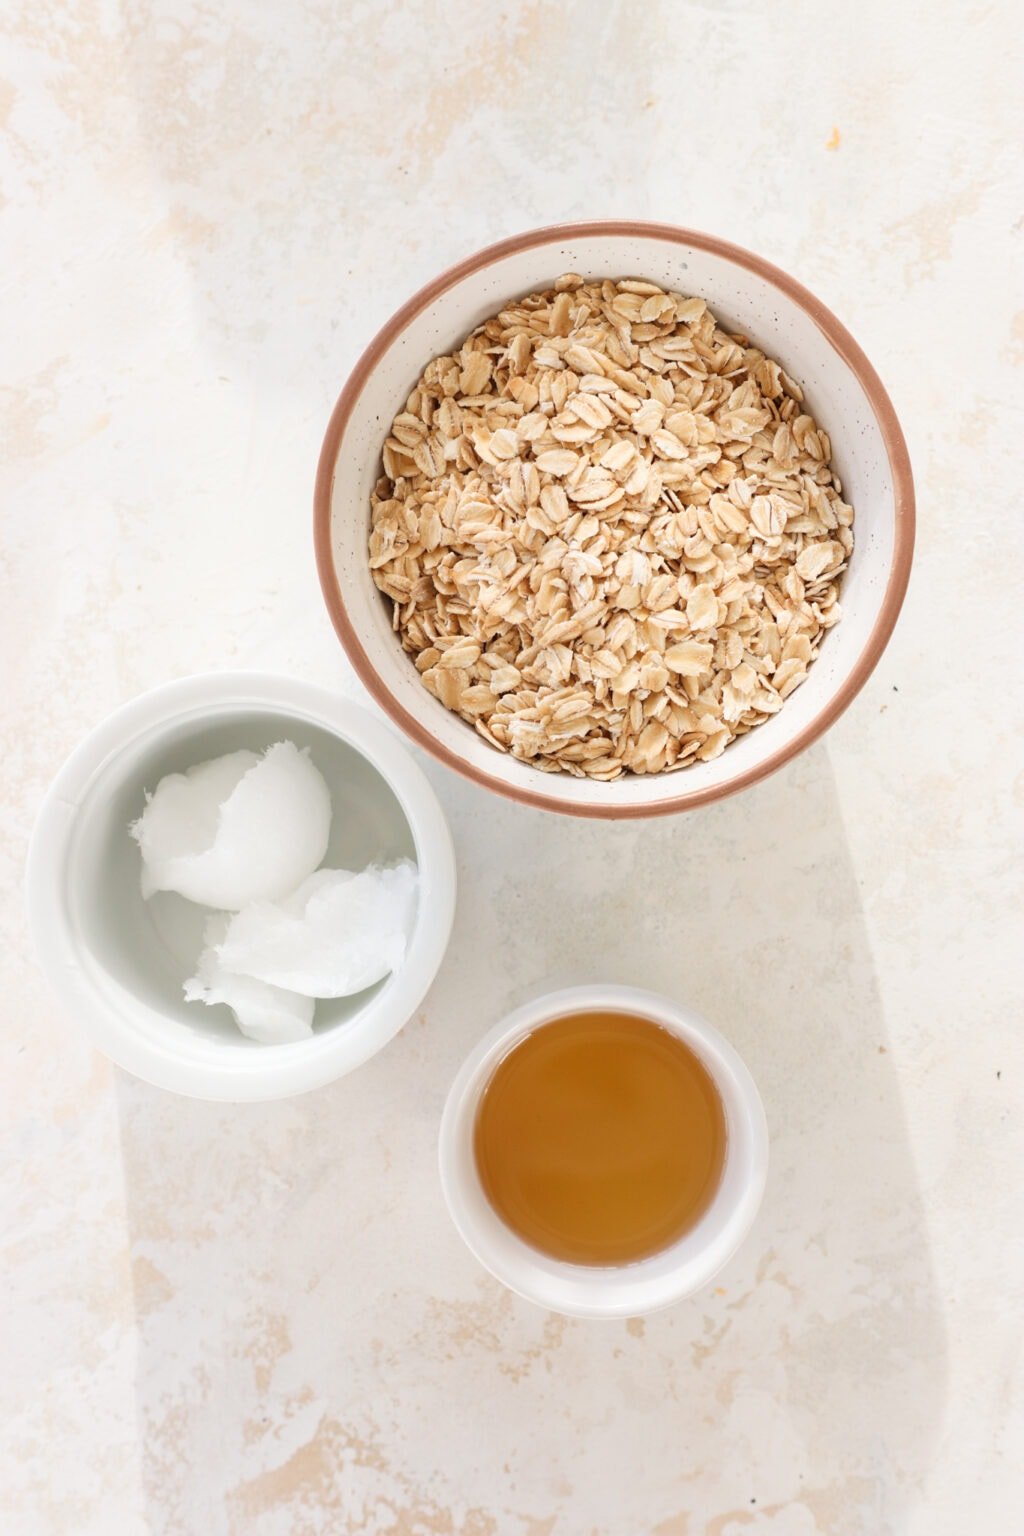 Ingredients for 3-Ingredient Gluten Free Cheesecake Crust in white bowls, including oats, coconut oil, and honey